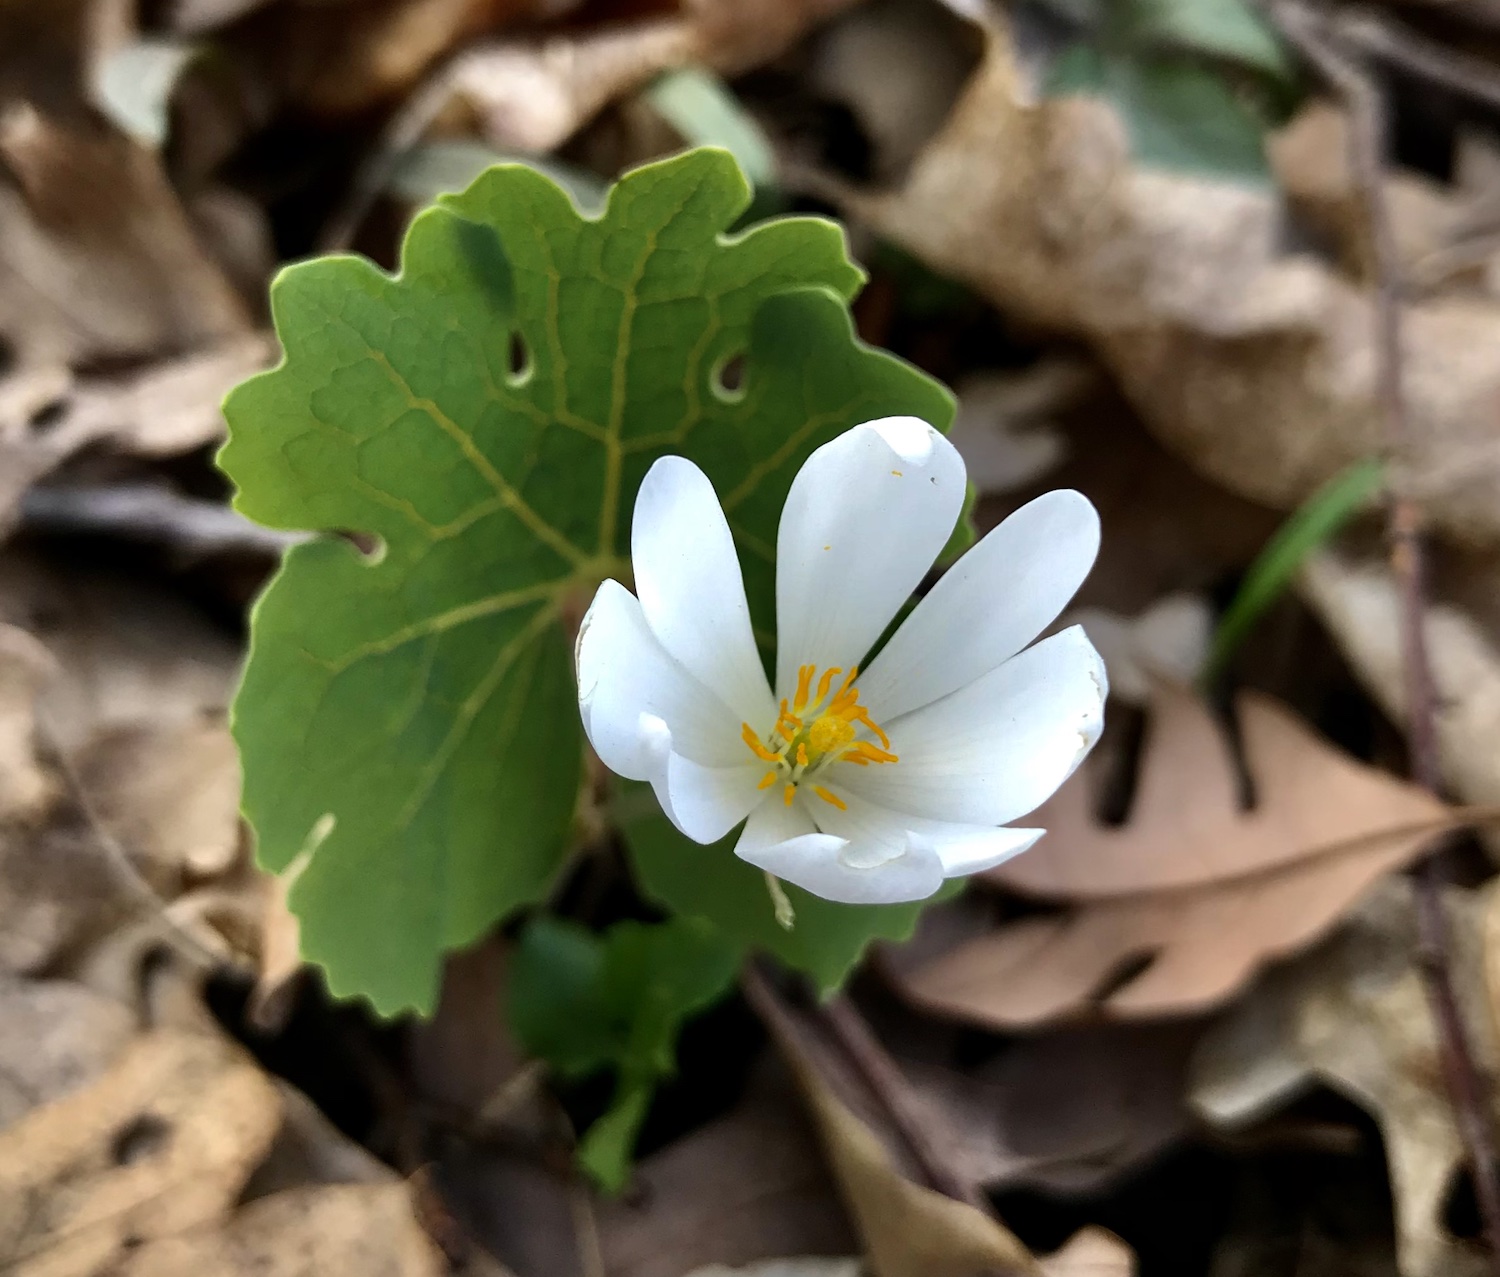 Canada bloodroot, Sanguinaria canadensis, a harbinger of spring in the upper Midwest